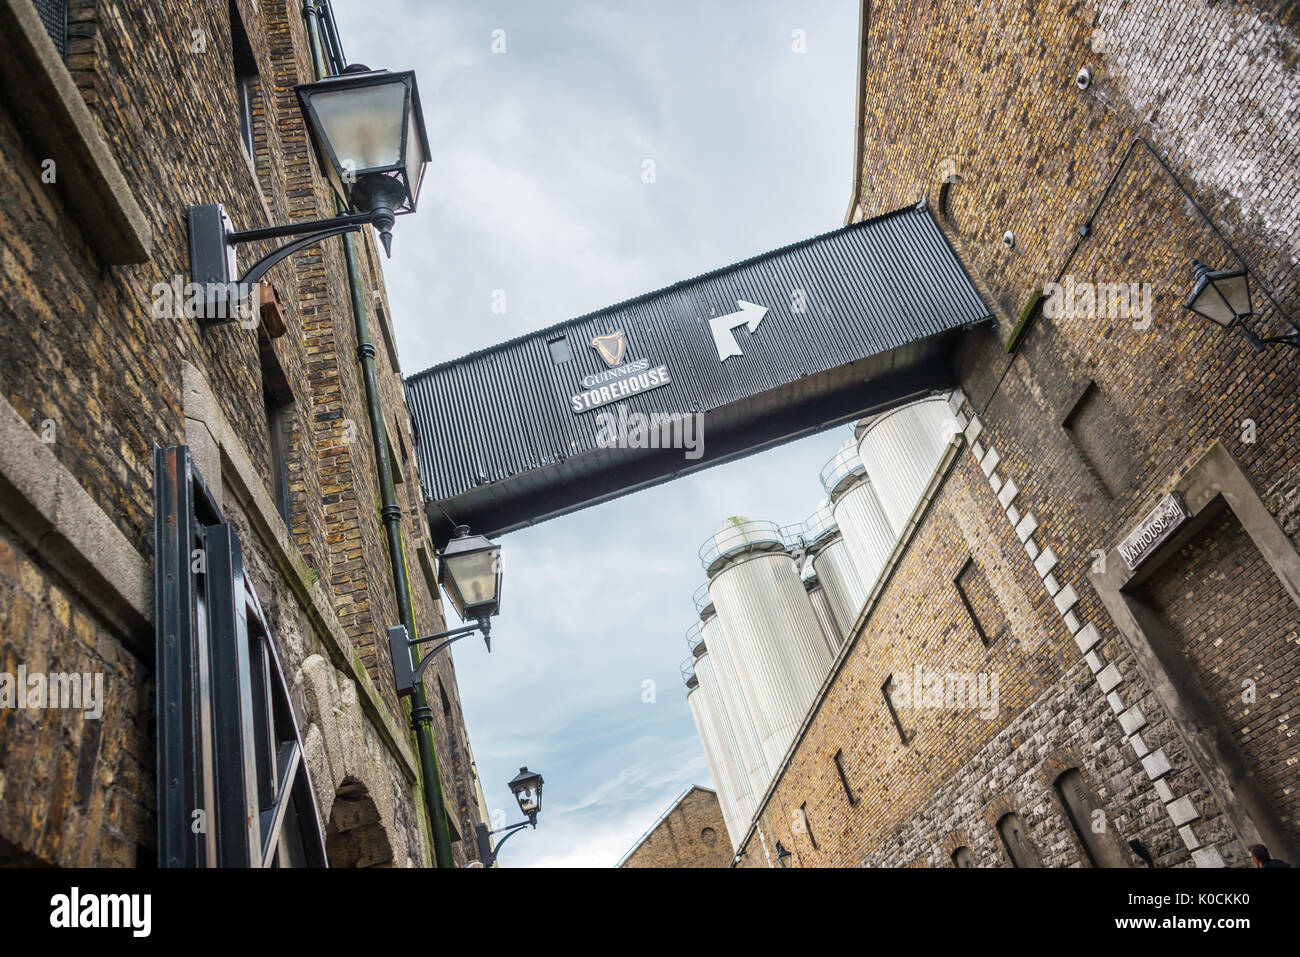 DUBLIN, IRELAND - AUGUST 14: Outside view of the Guinness storehouse brewery. The Guinness Storehouse is a popular tourist attraction in Dublin Stock Photo